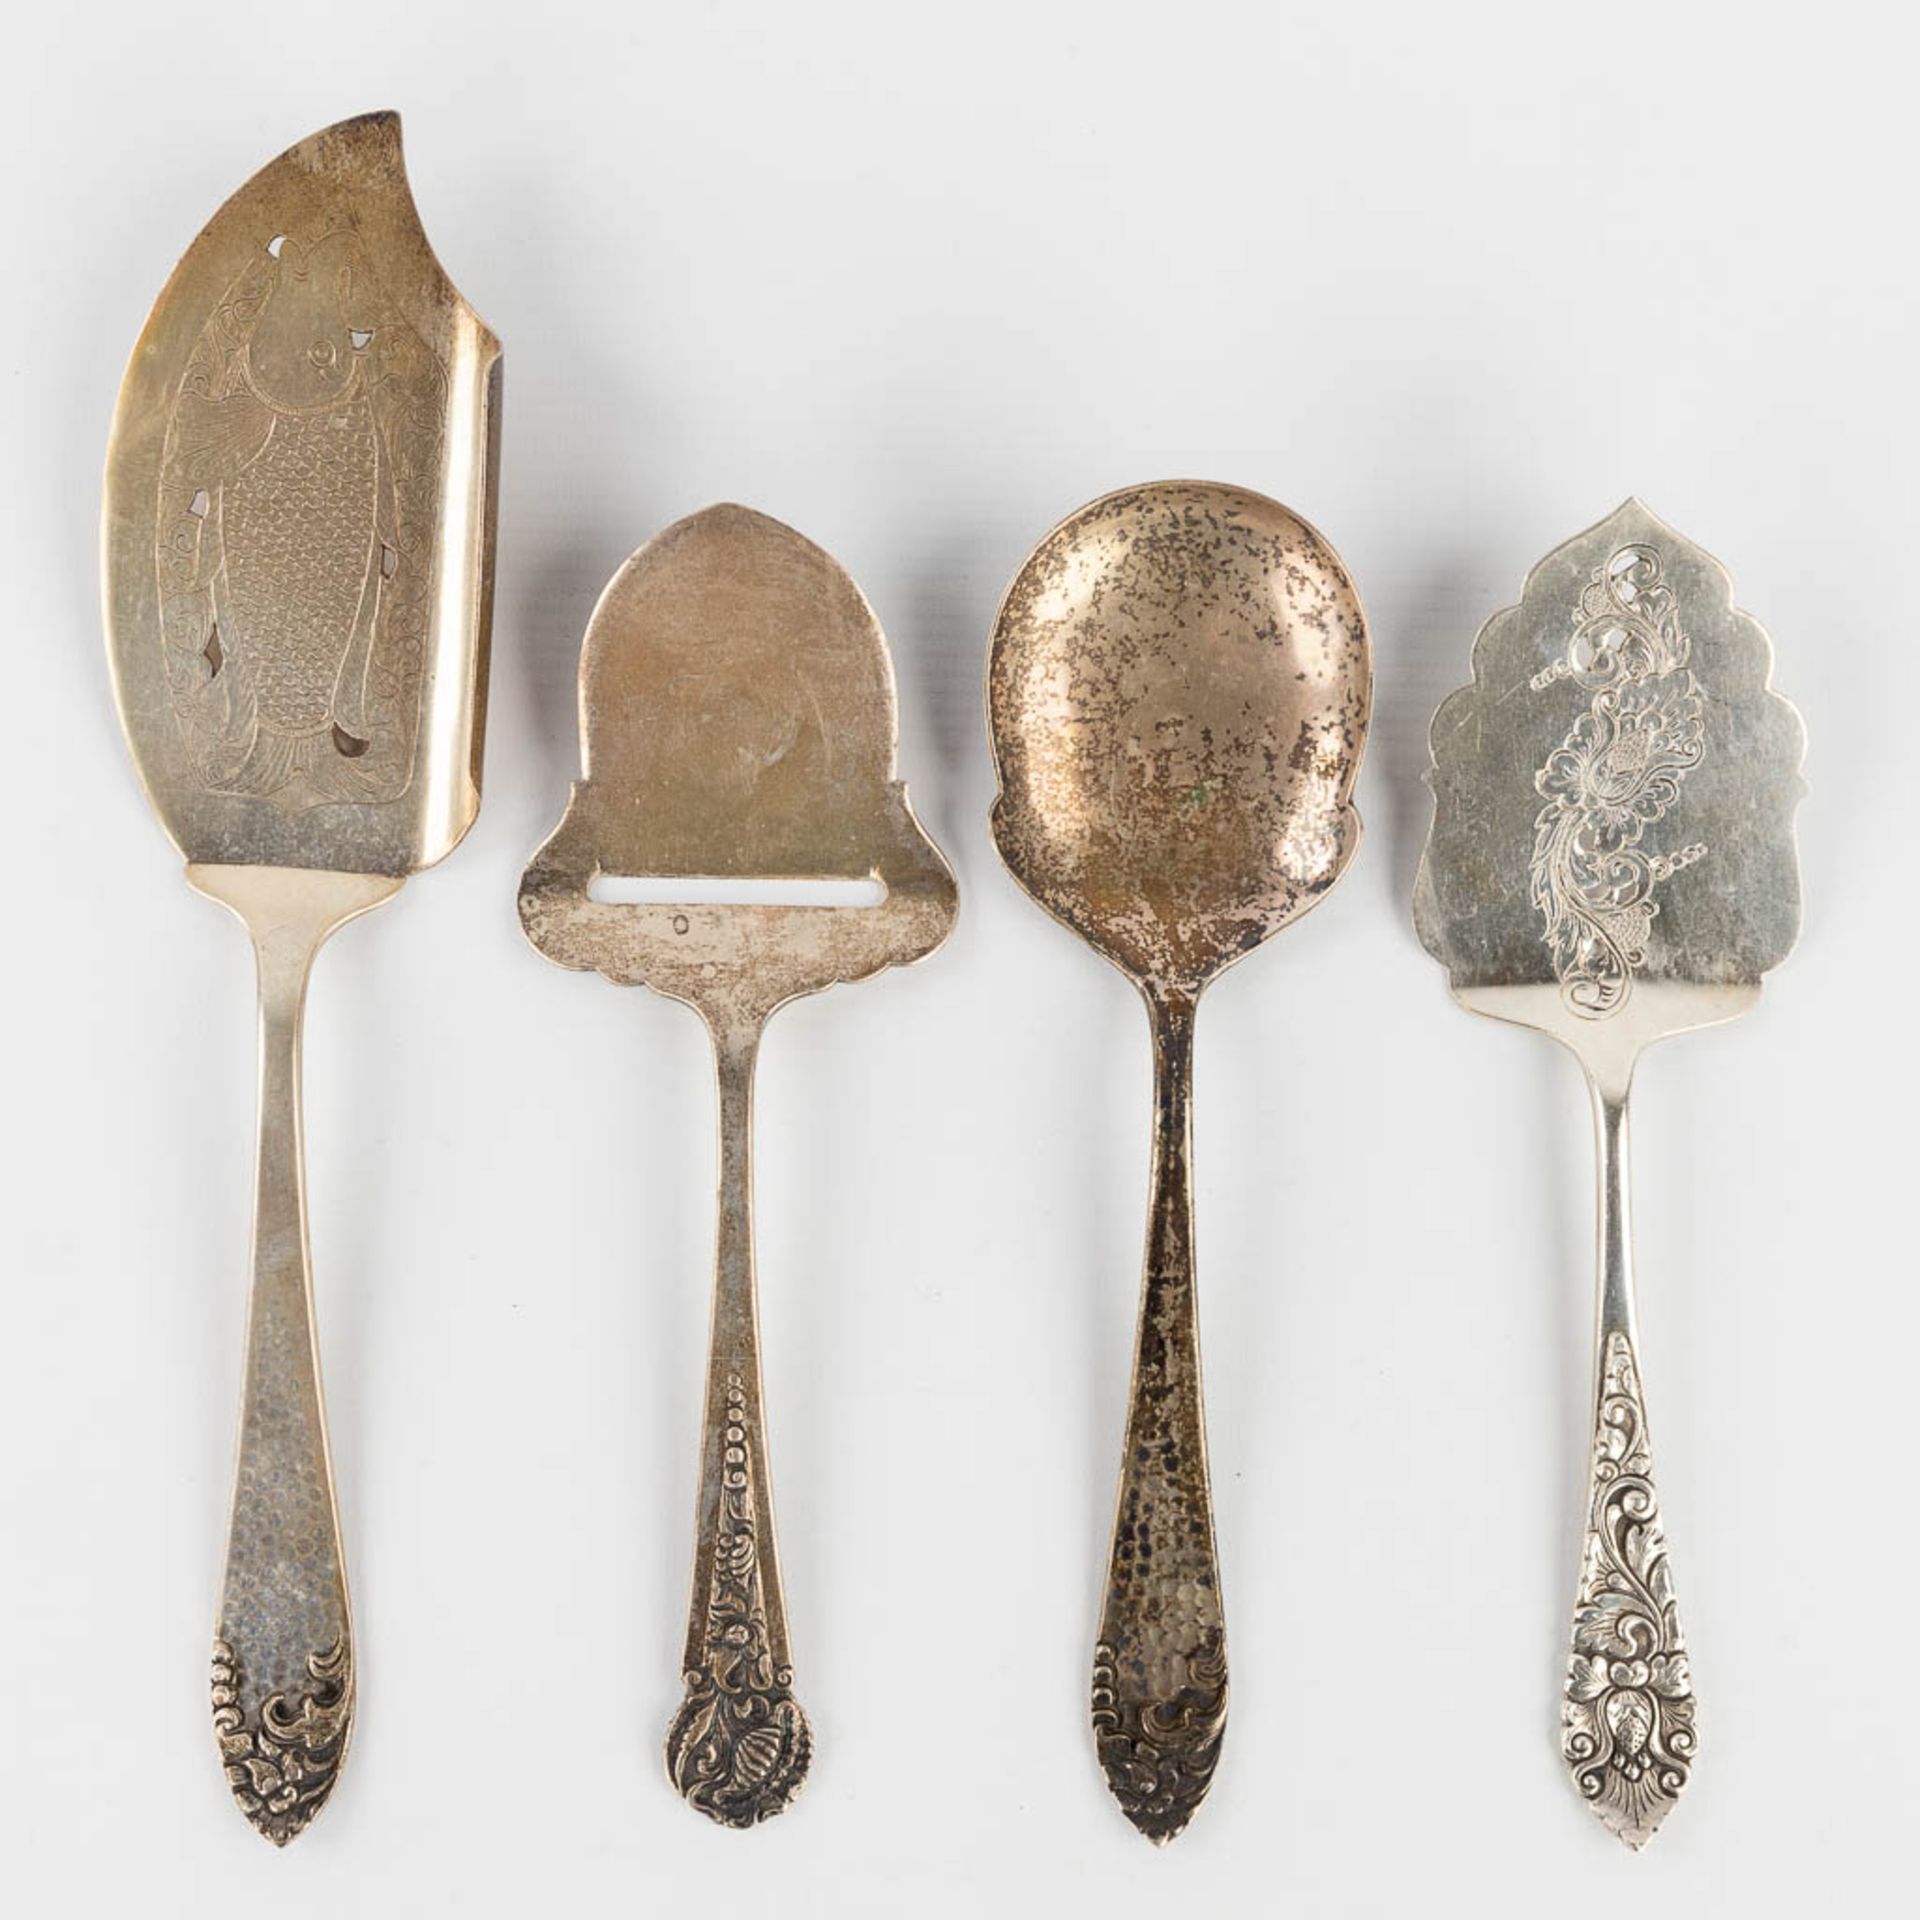 61 pieces of silver cutlery and accessories. (L:29 cm) - Image 17 of 22